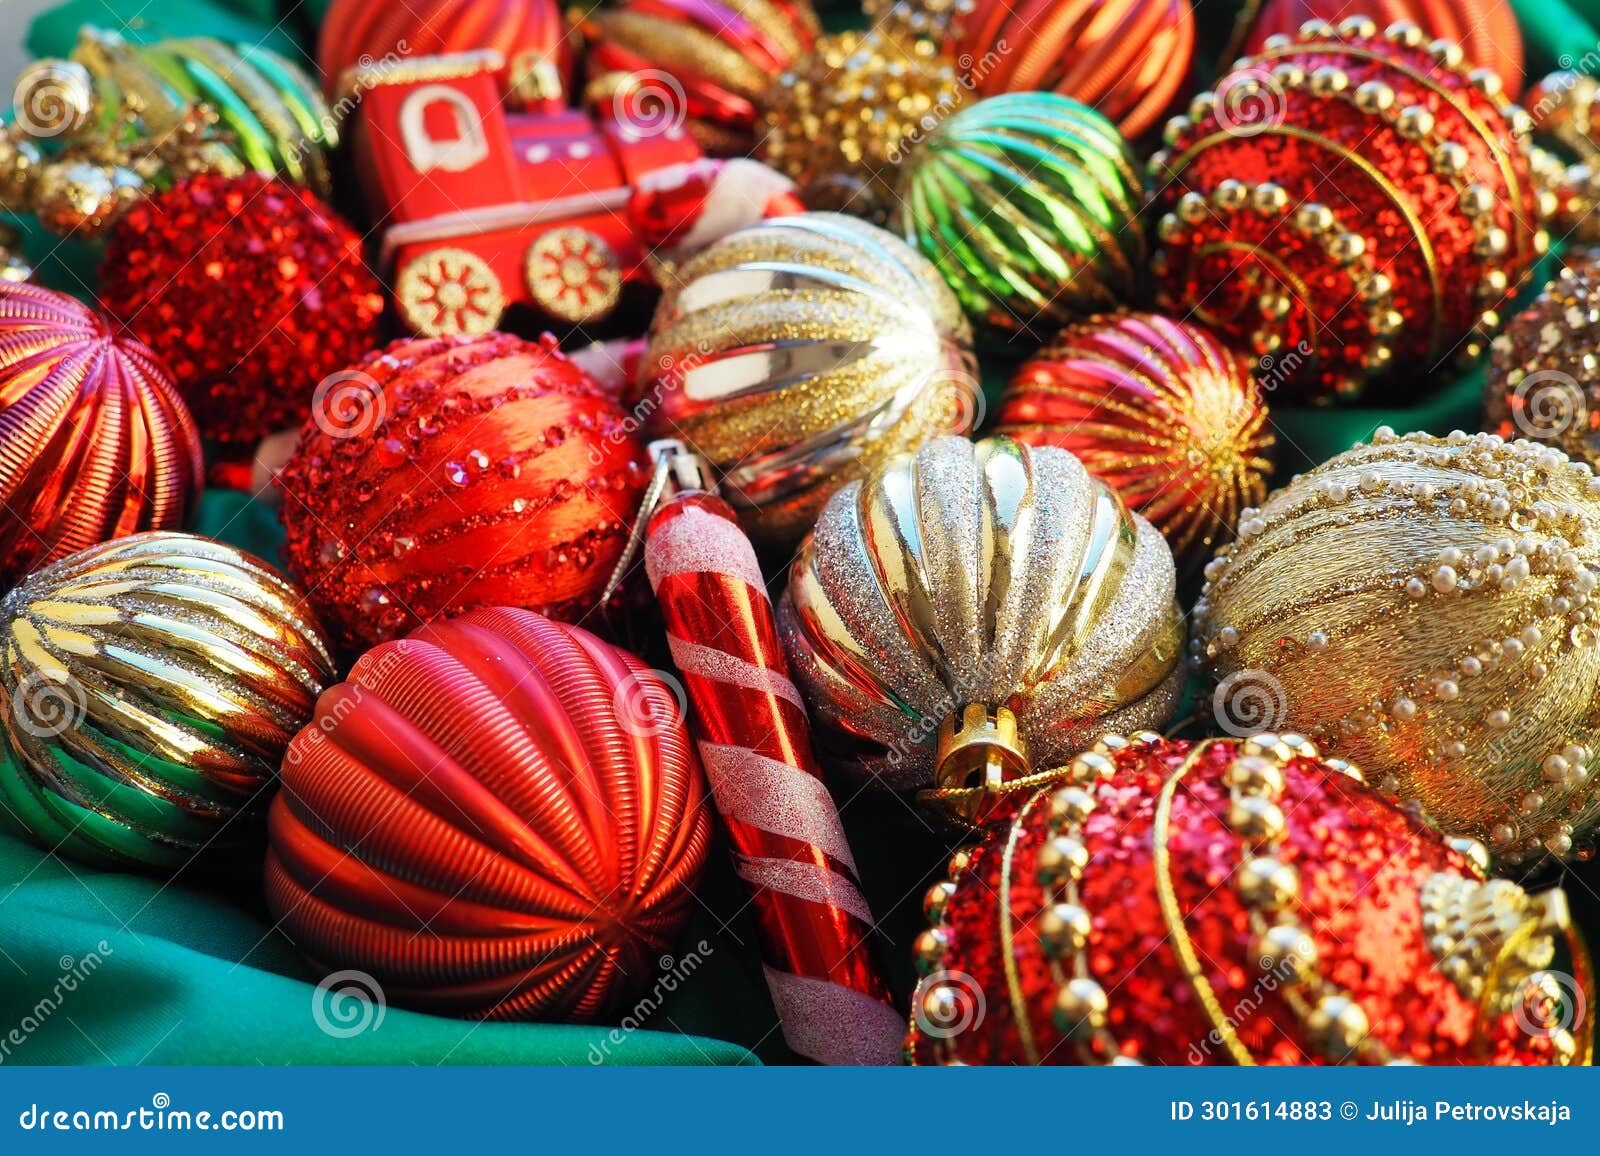 New Year S Christmas Balls, Tinsel and Decorations Close Up. a Lot of ...